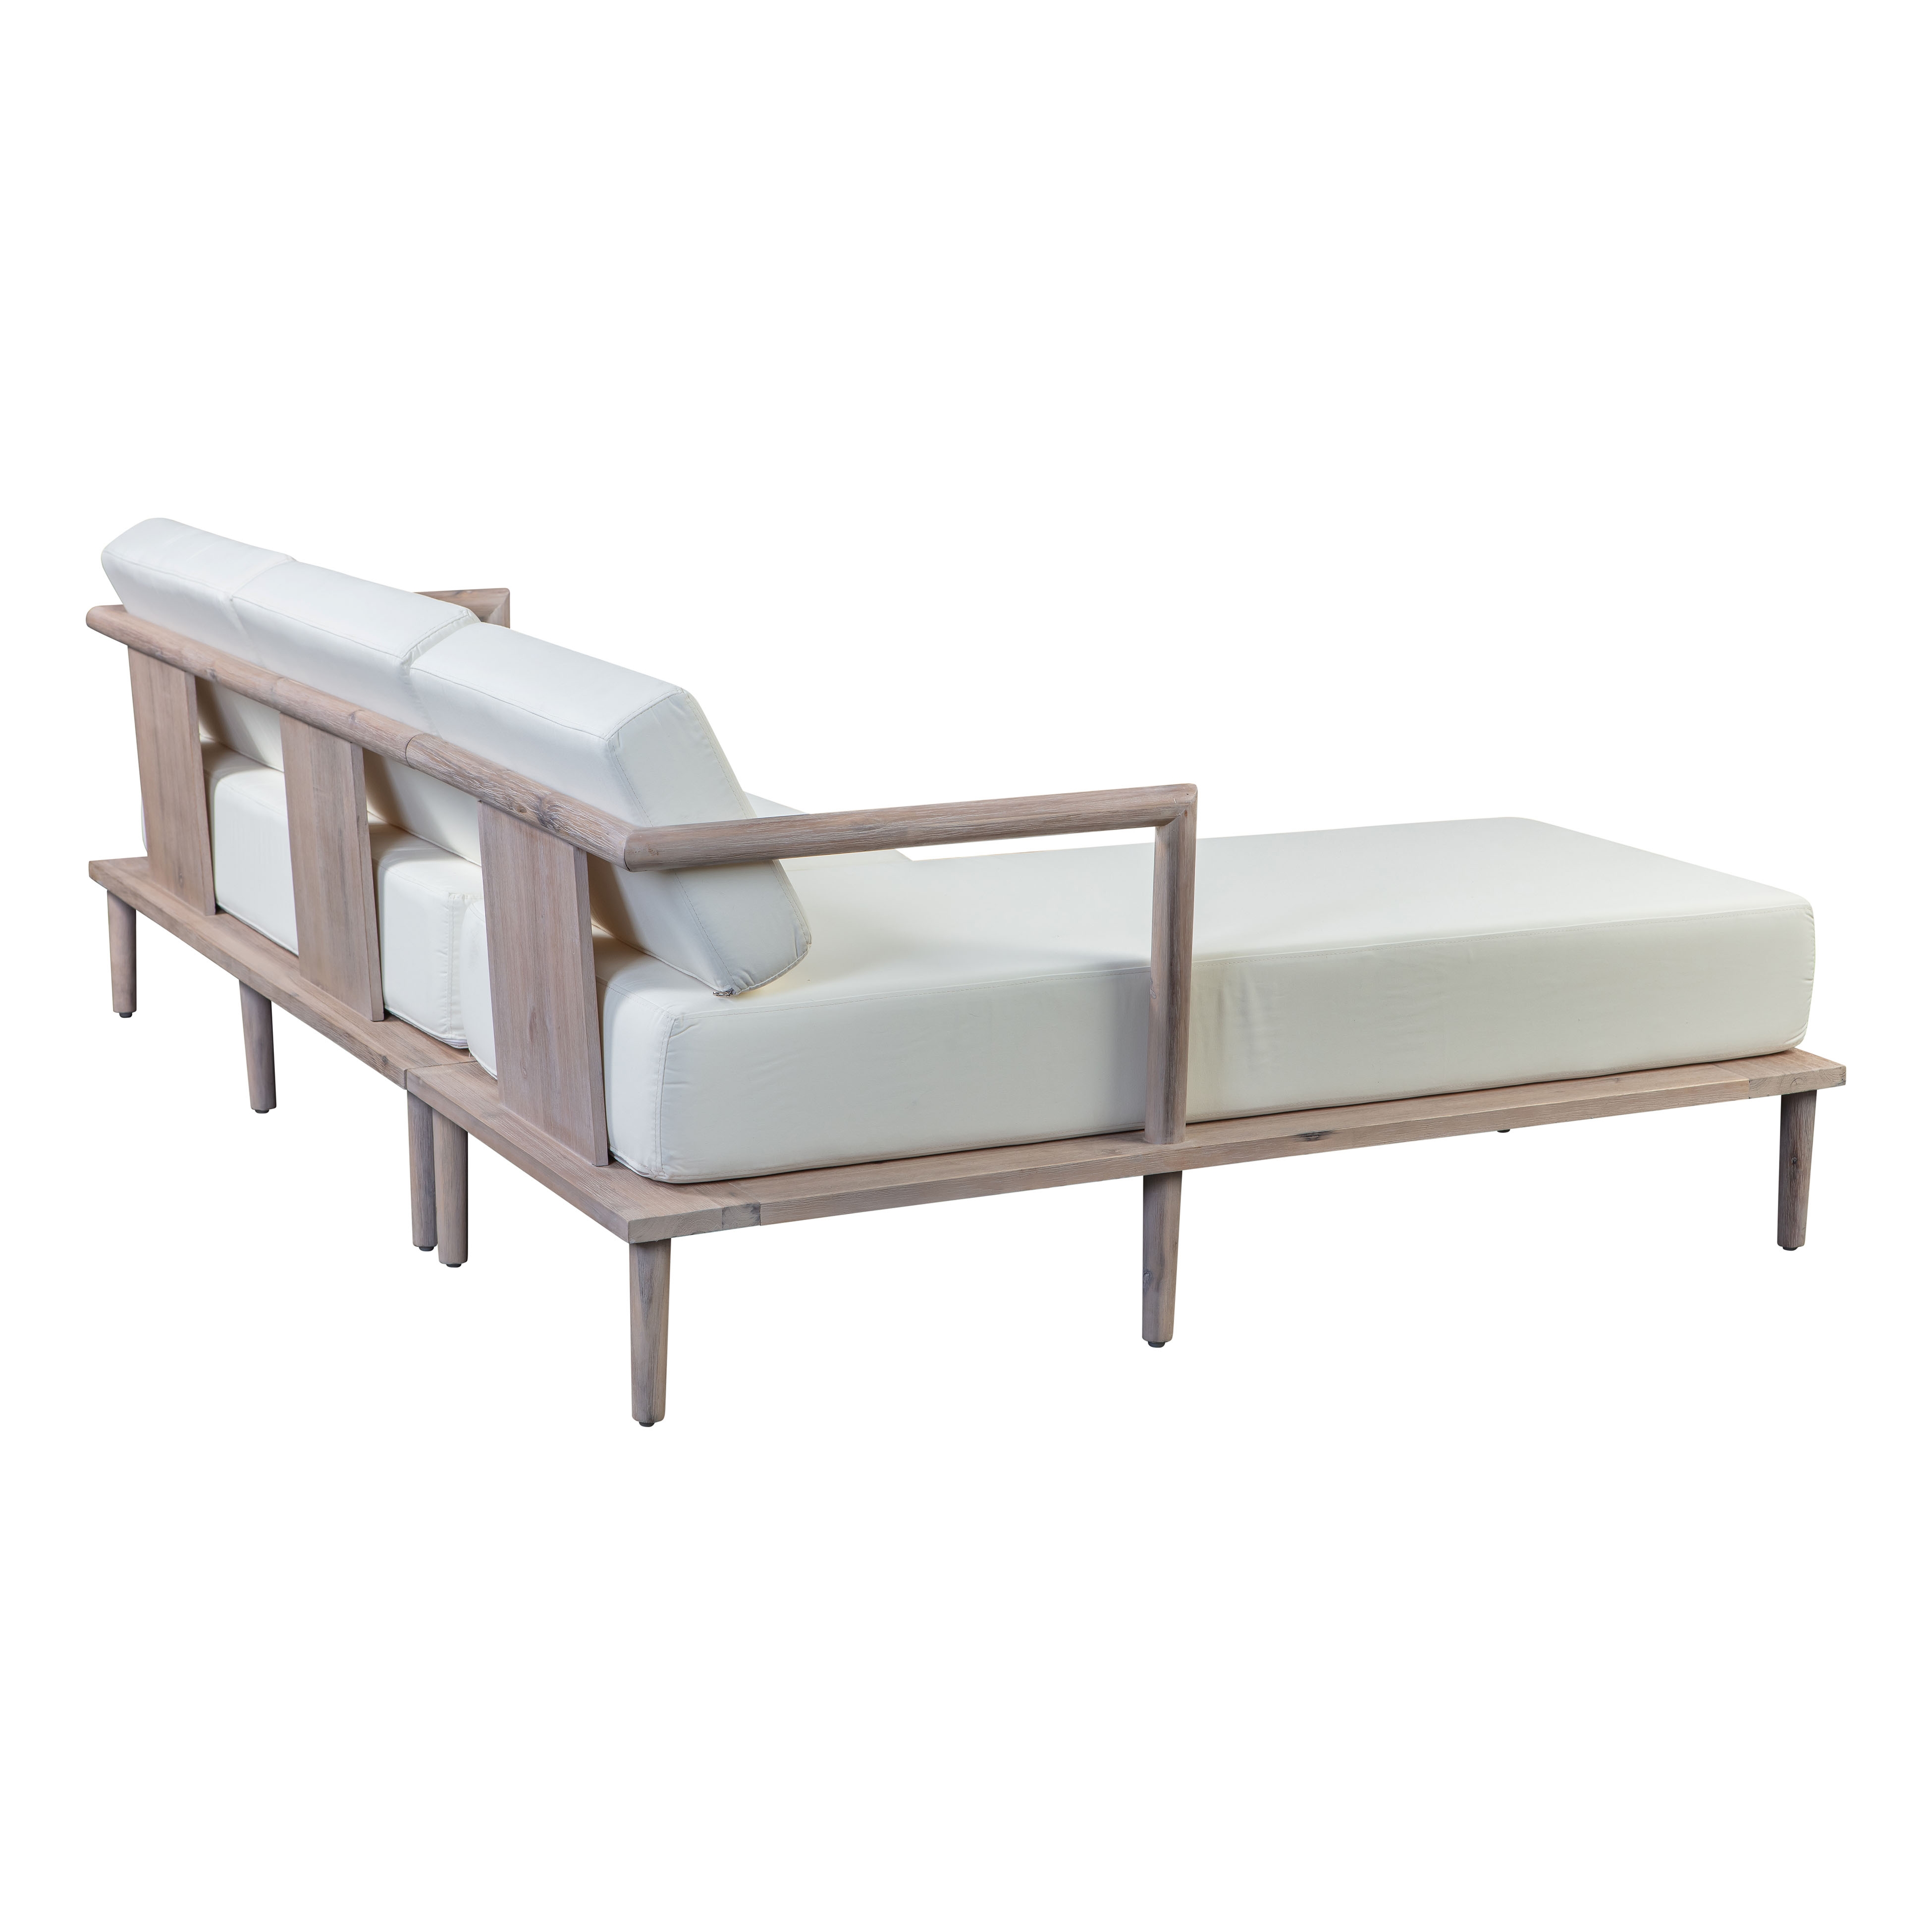 Emerson Cream Outdoor Sectional - LAF - Image 3